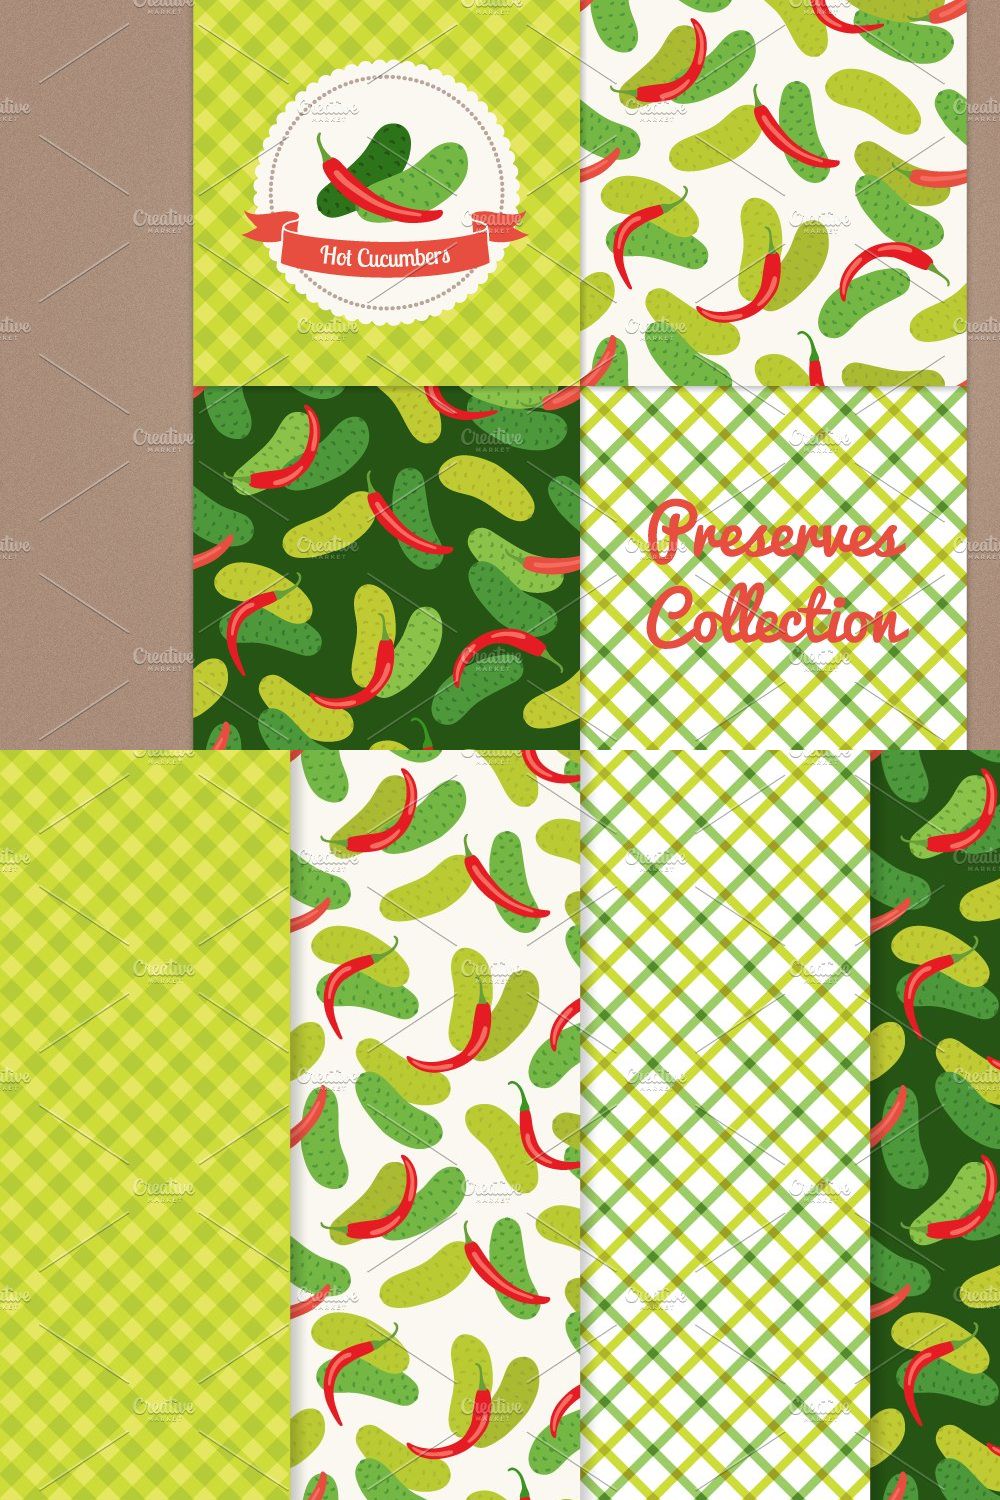 Hot cucumbers pinterest preview image.